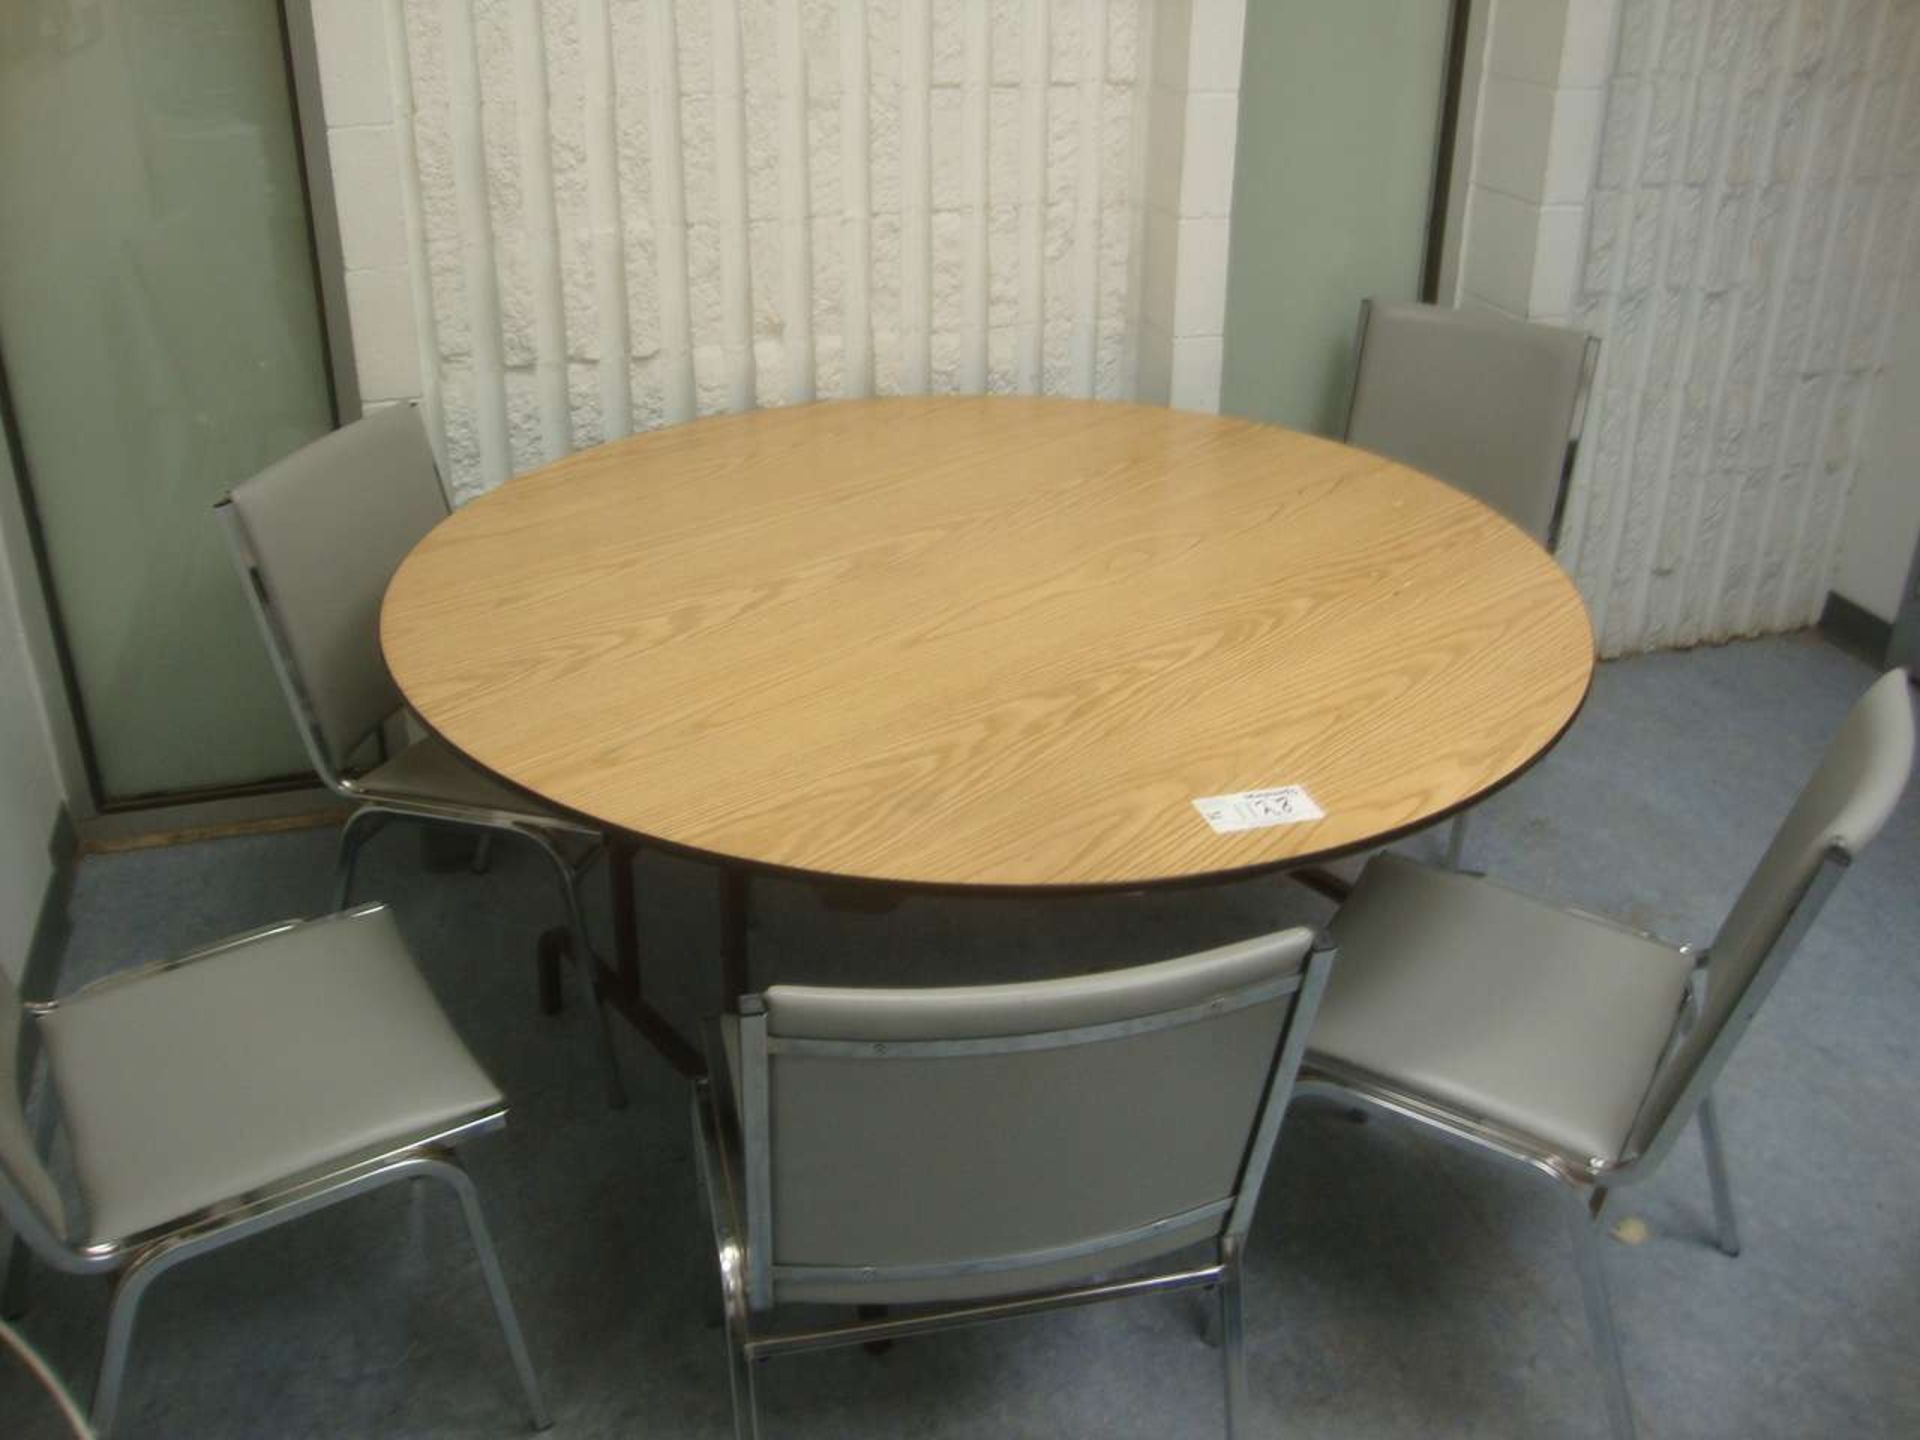 Lunch table and chairs